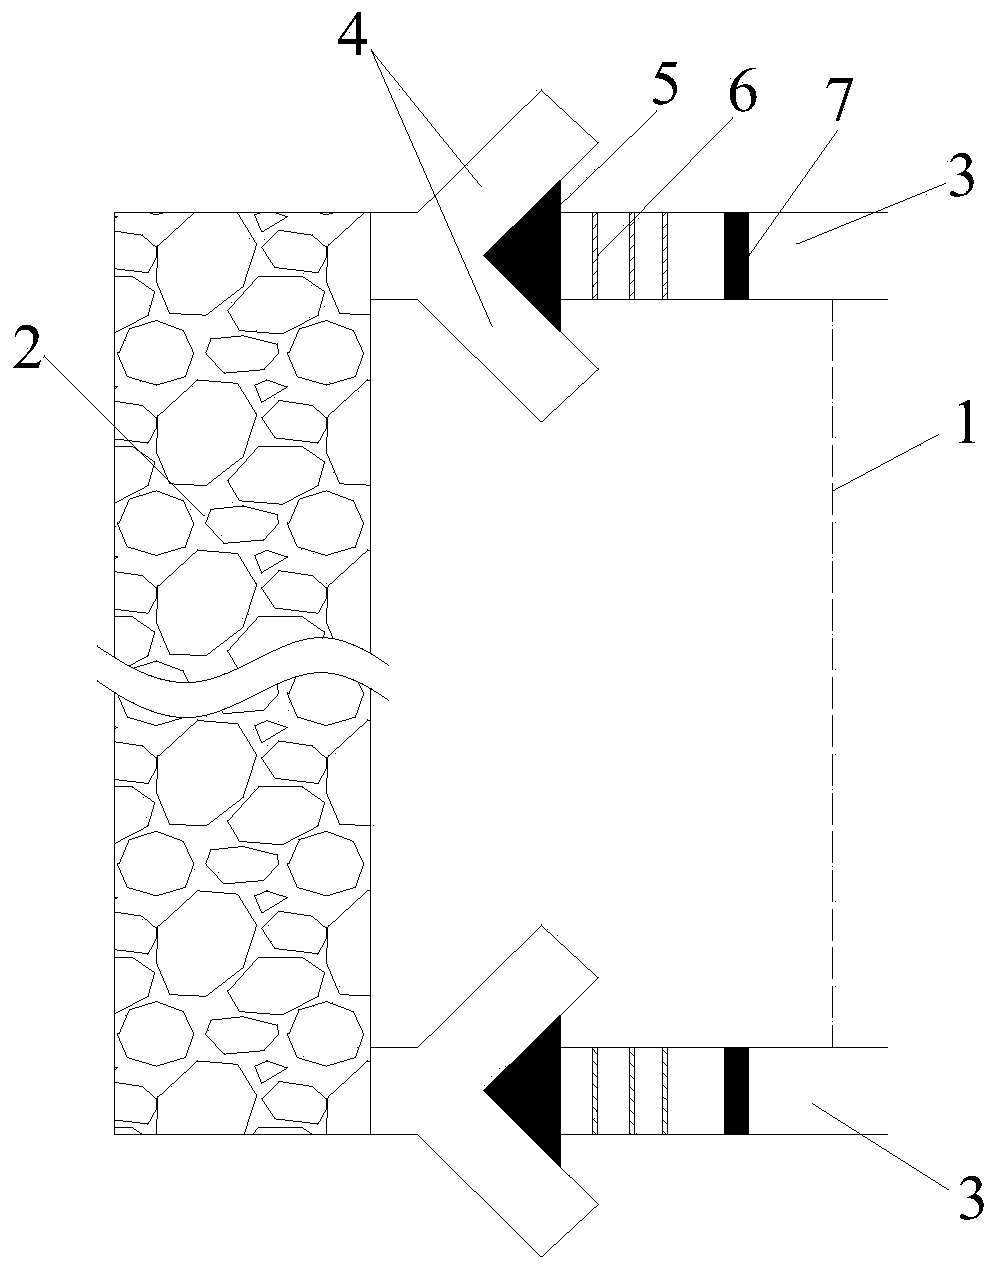 A roadway composite sealing method for hard roof caving impact in goaf